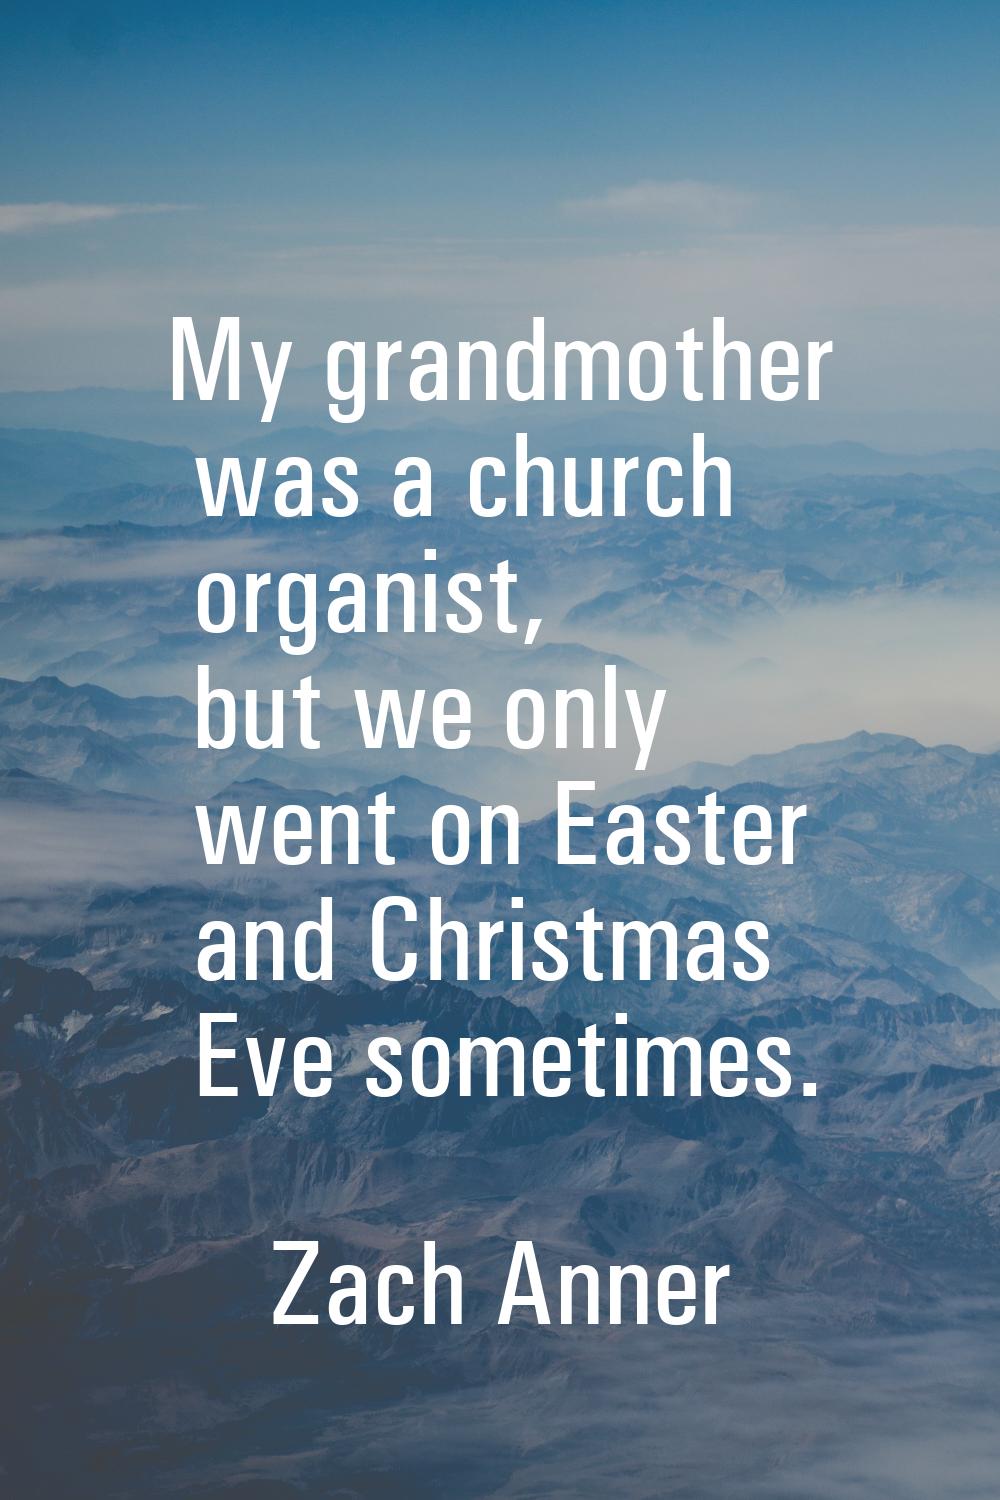 My grandmother was a church organist, but we only went on Easter and Christmas Eve sometimes.